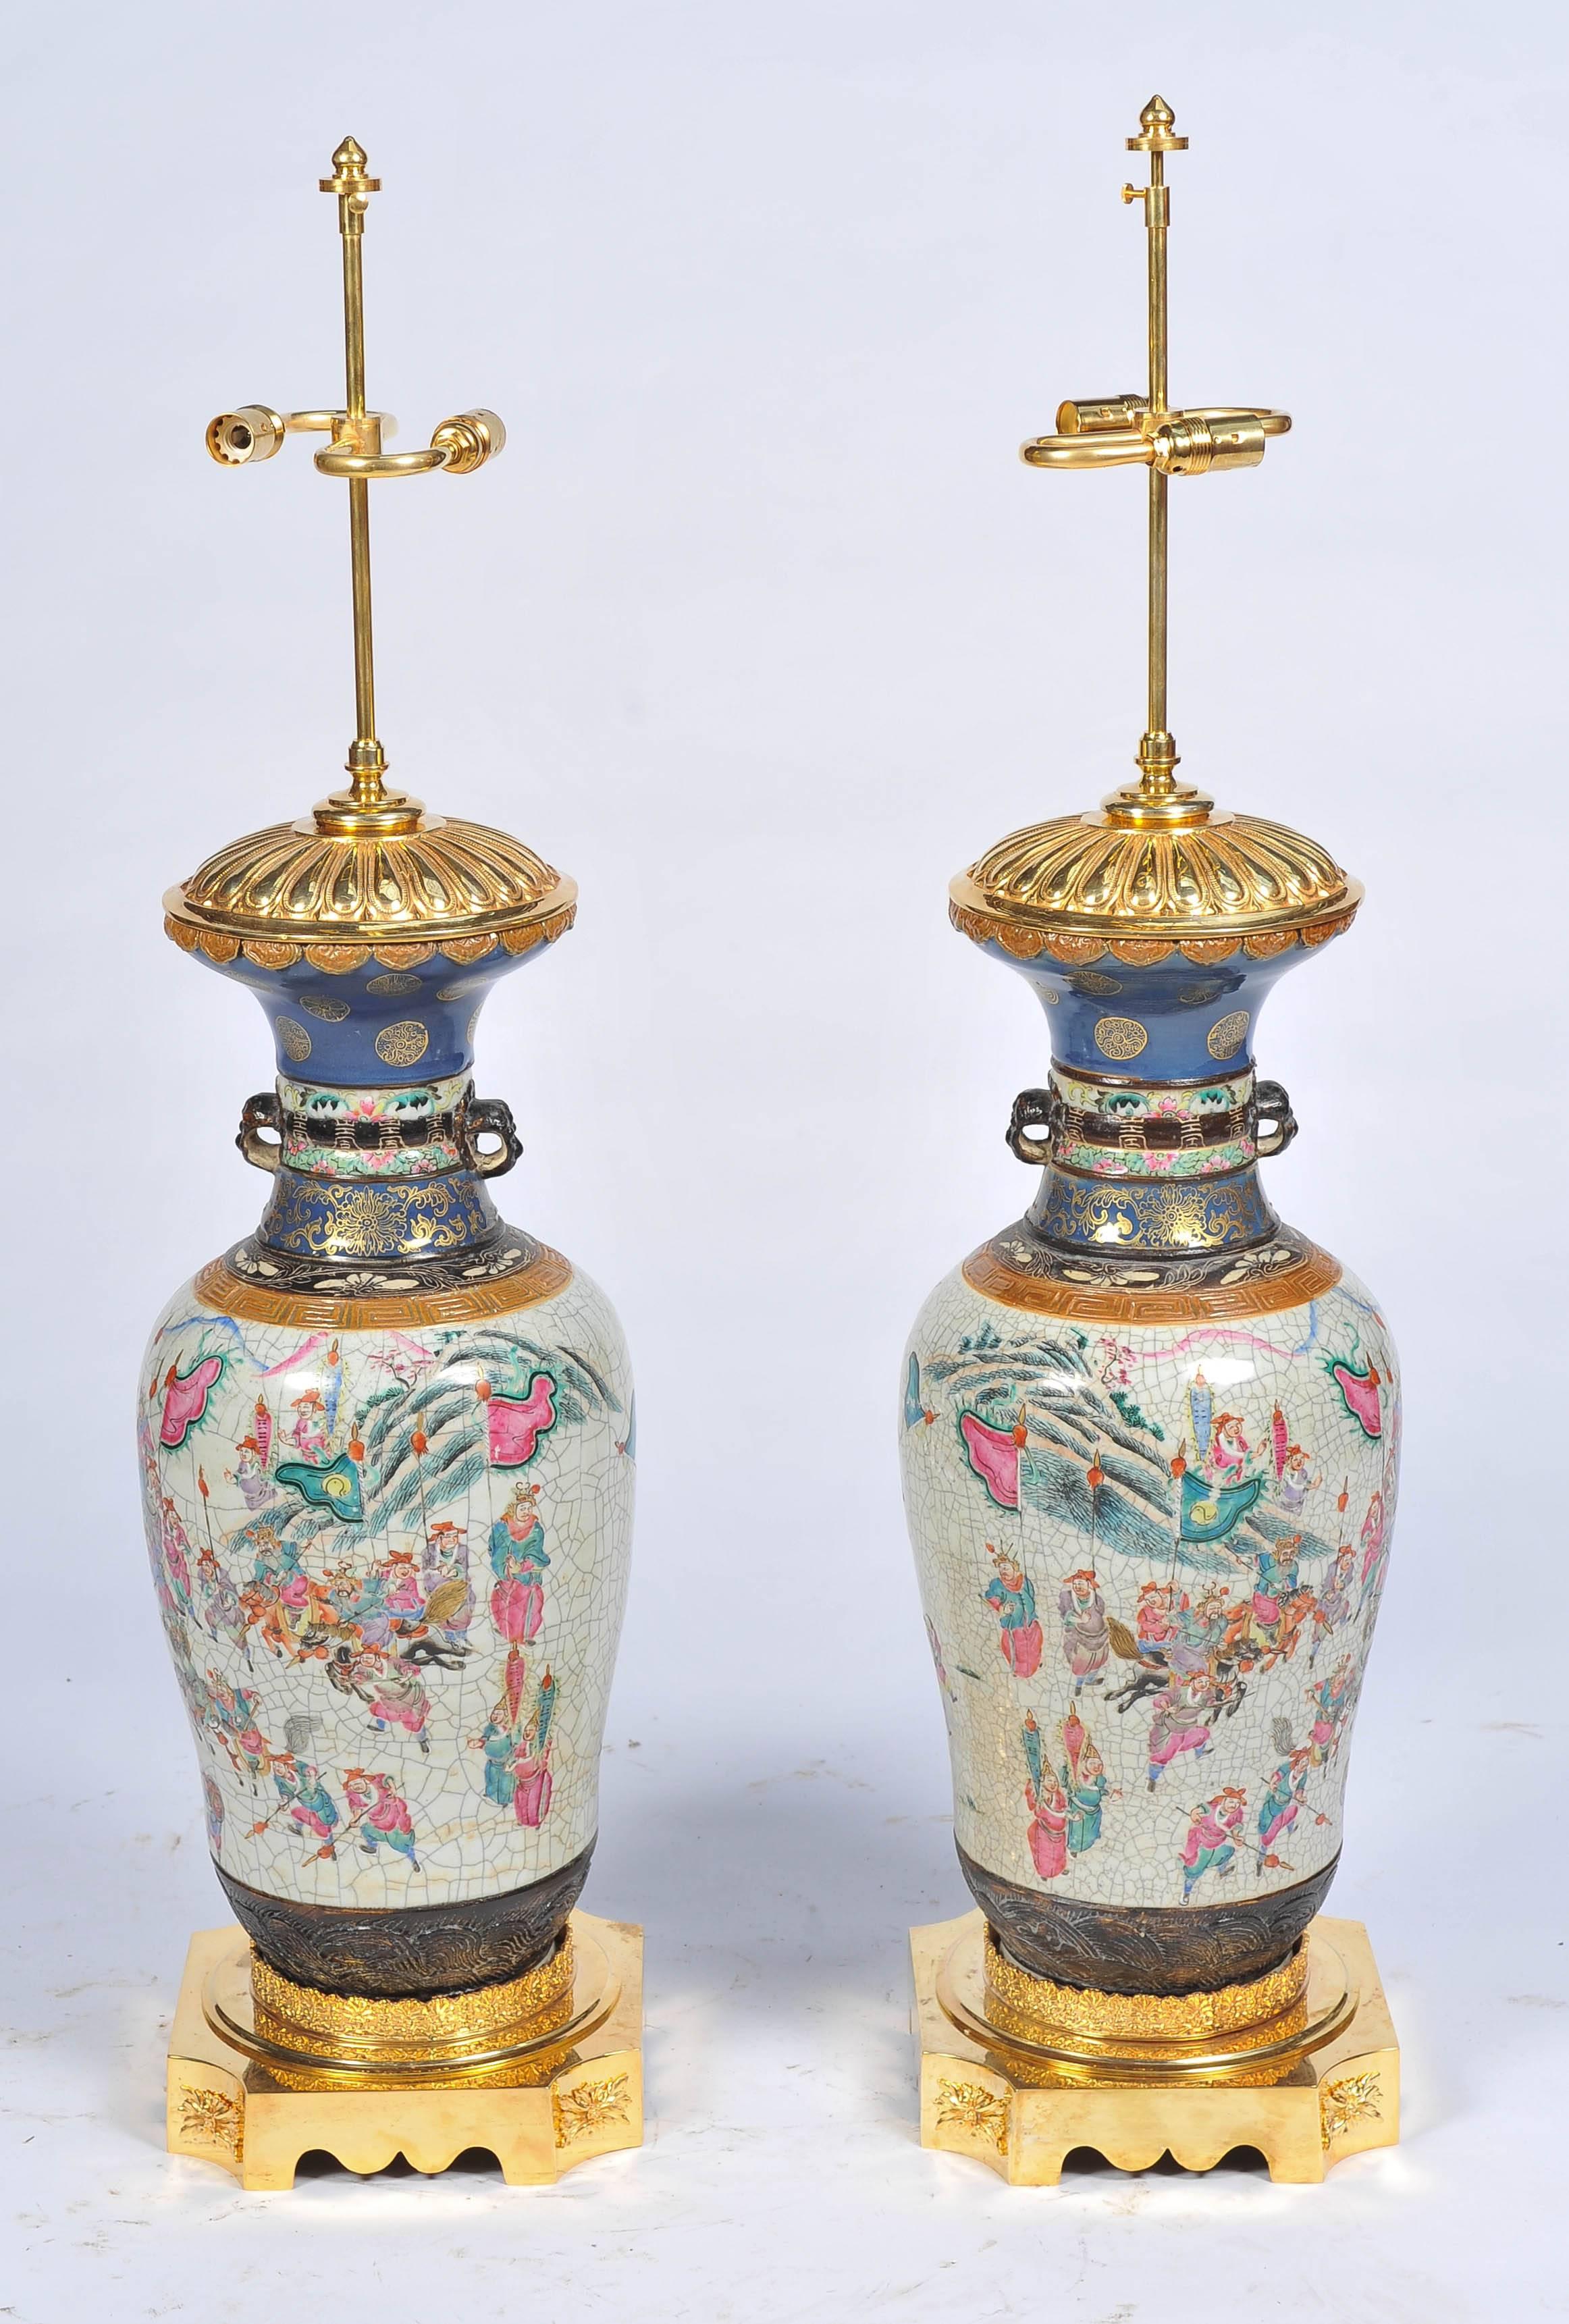 Gilt Large Pair of 19th Century Chinese Crackleware Vases or Lamps